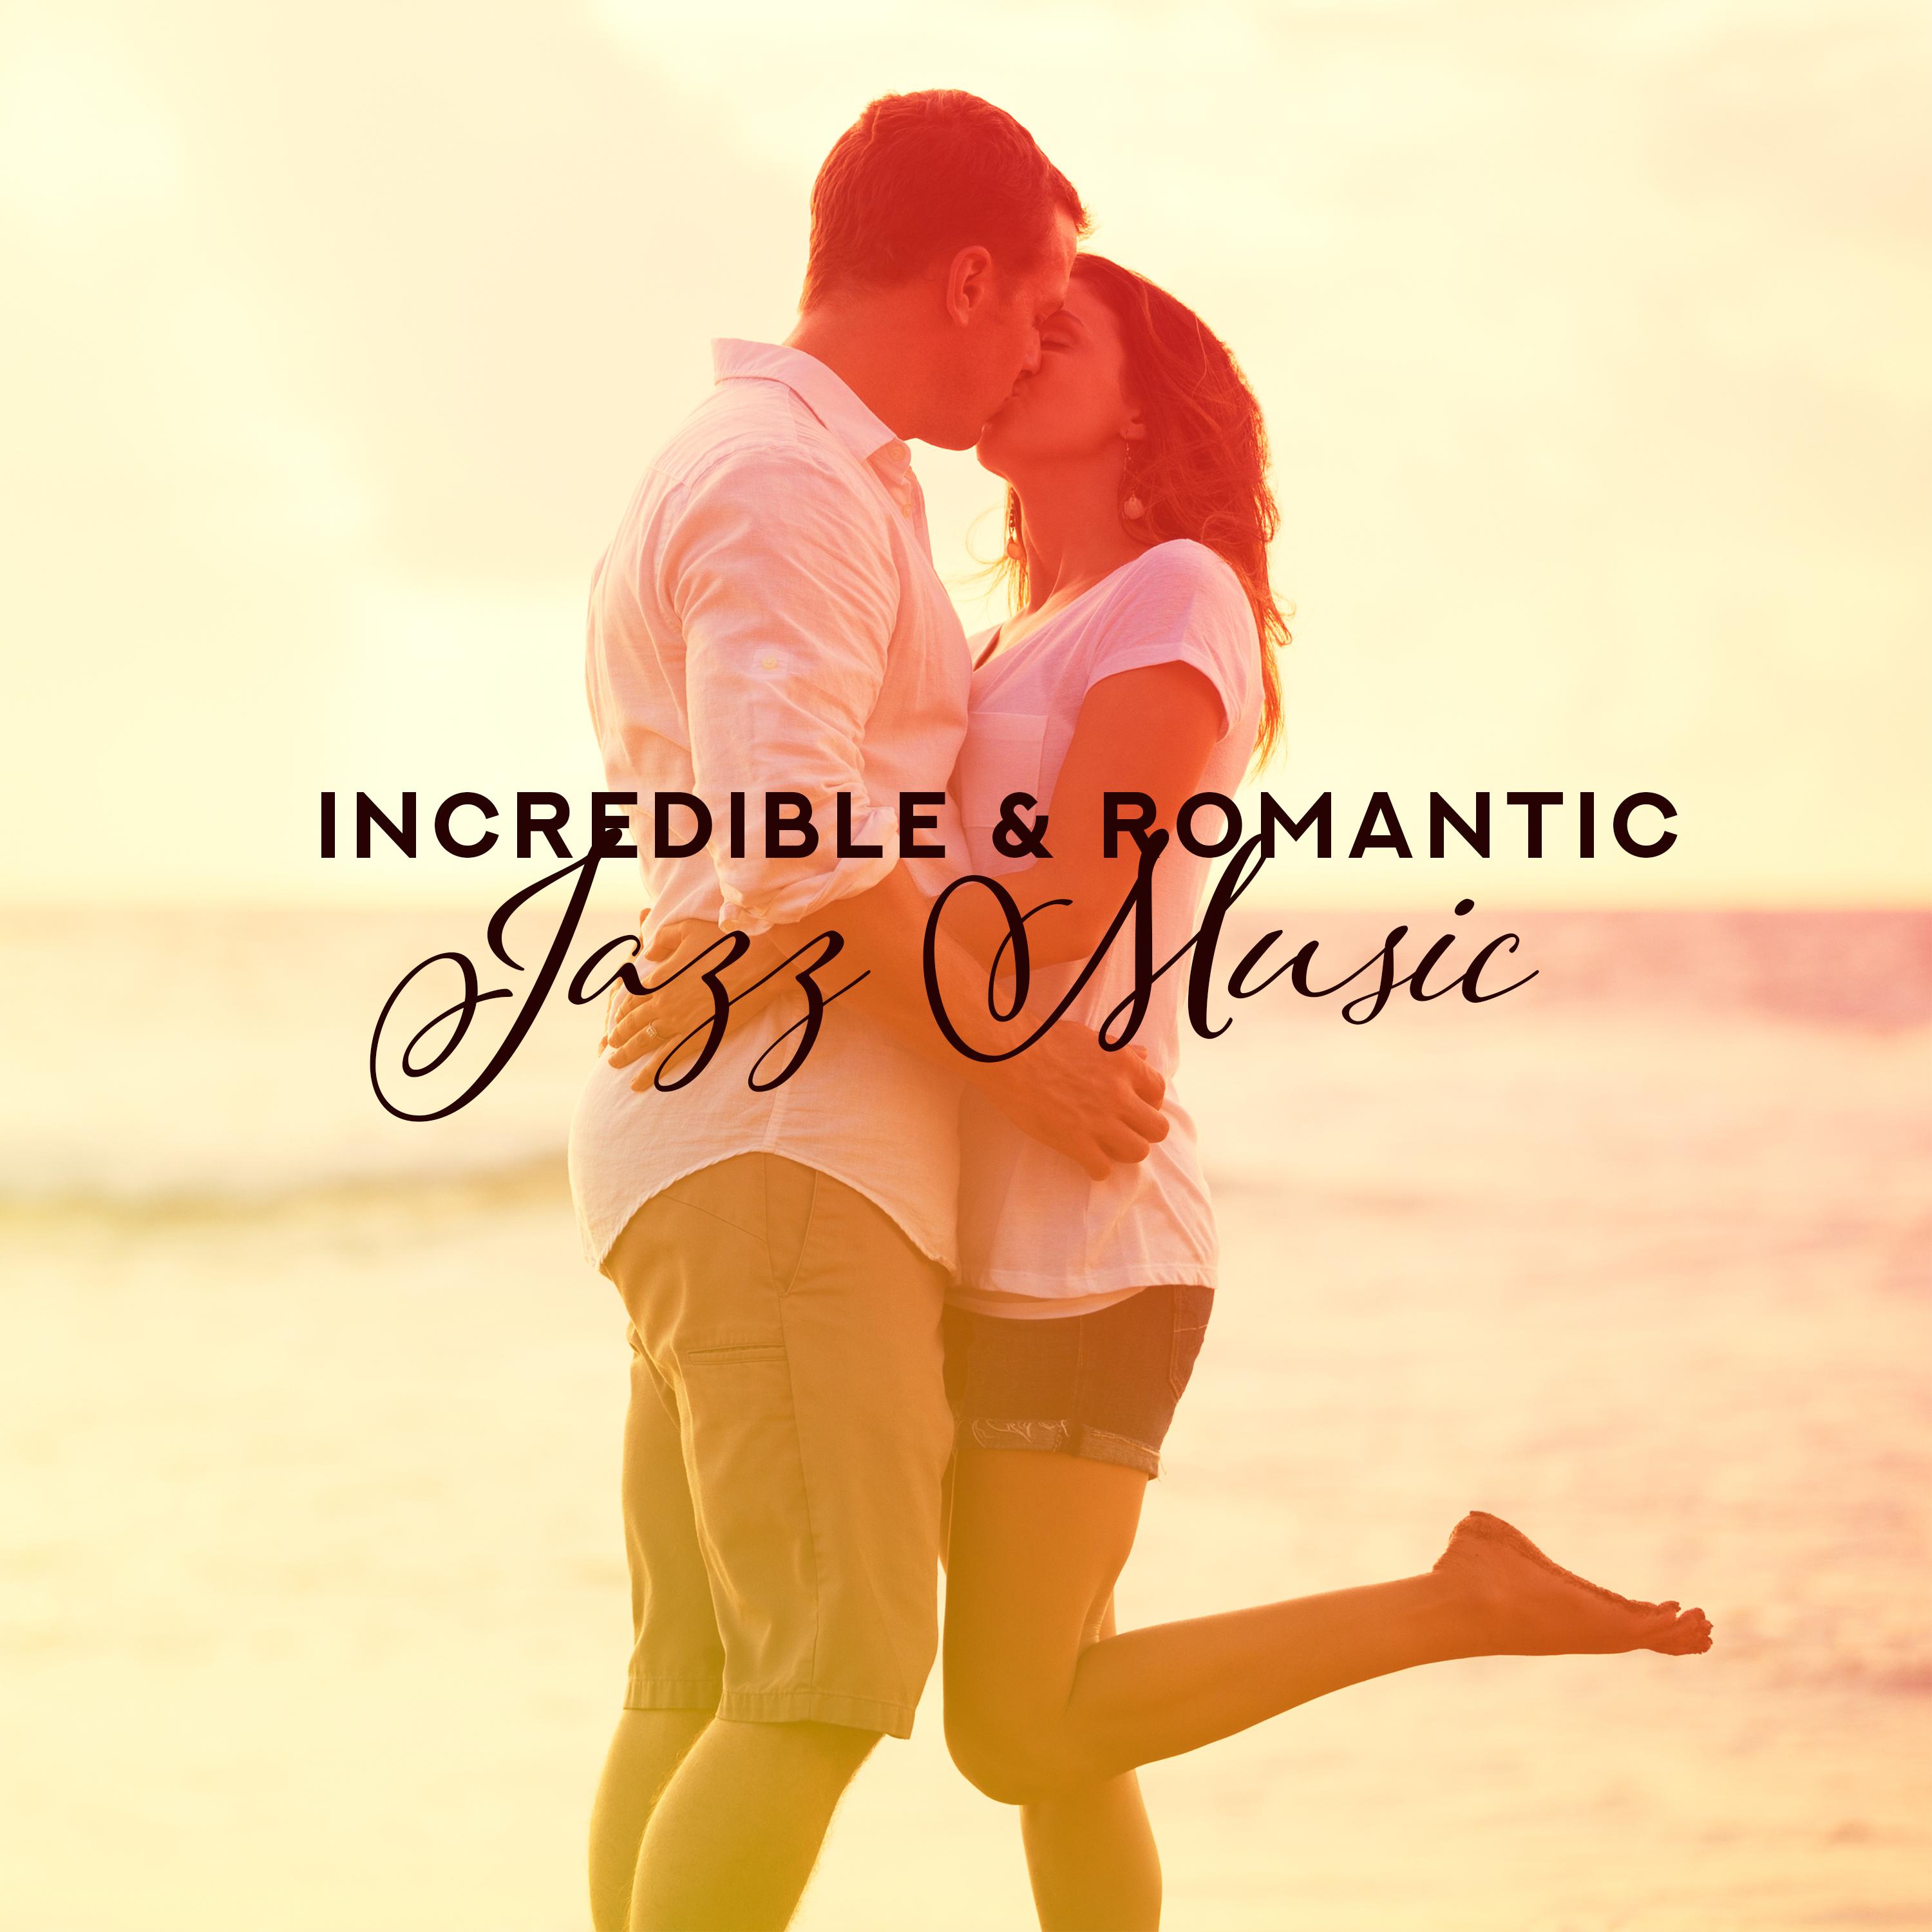 Incredible & Romantic Jazz Music (Gentle Moments for Two, Trombone & Saxophone, Slow Dance, Dinner Jazz, Cafe Jazz Music Background, The Best Spring Jazz Ensemble 2019)